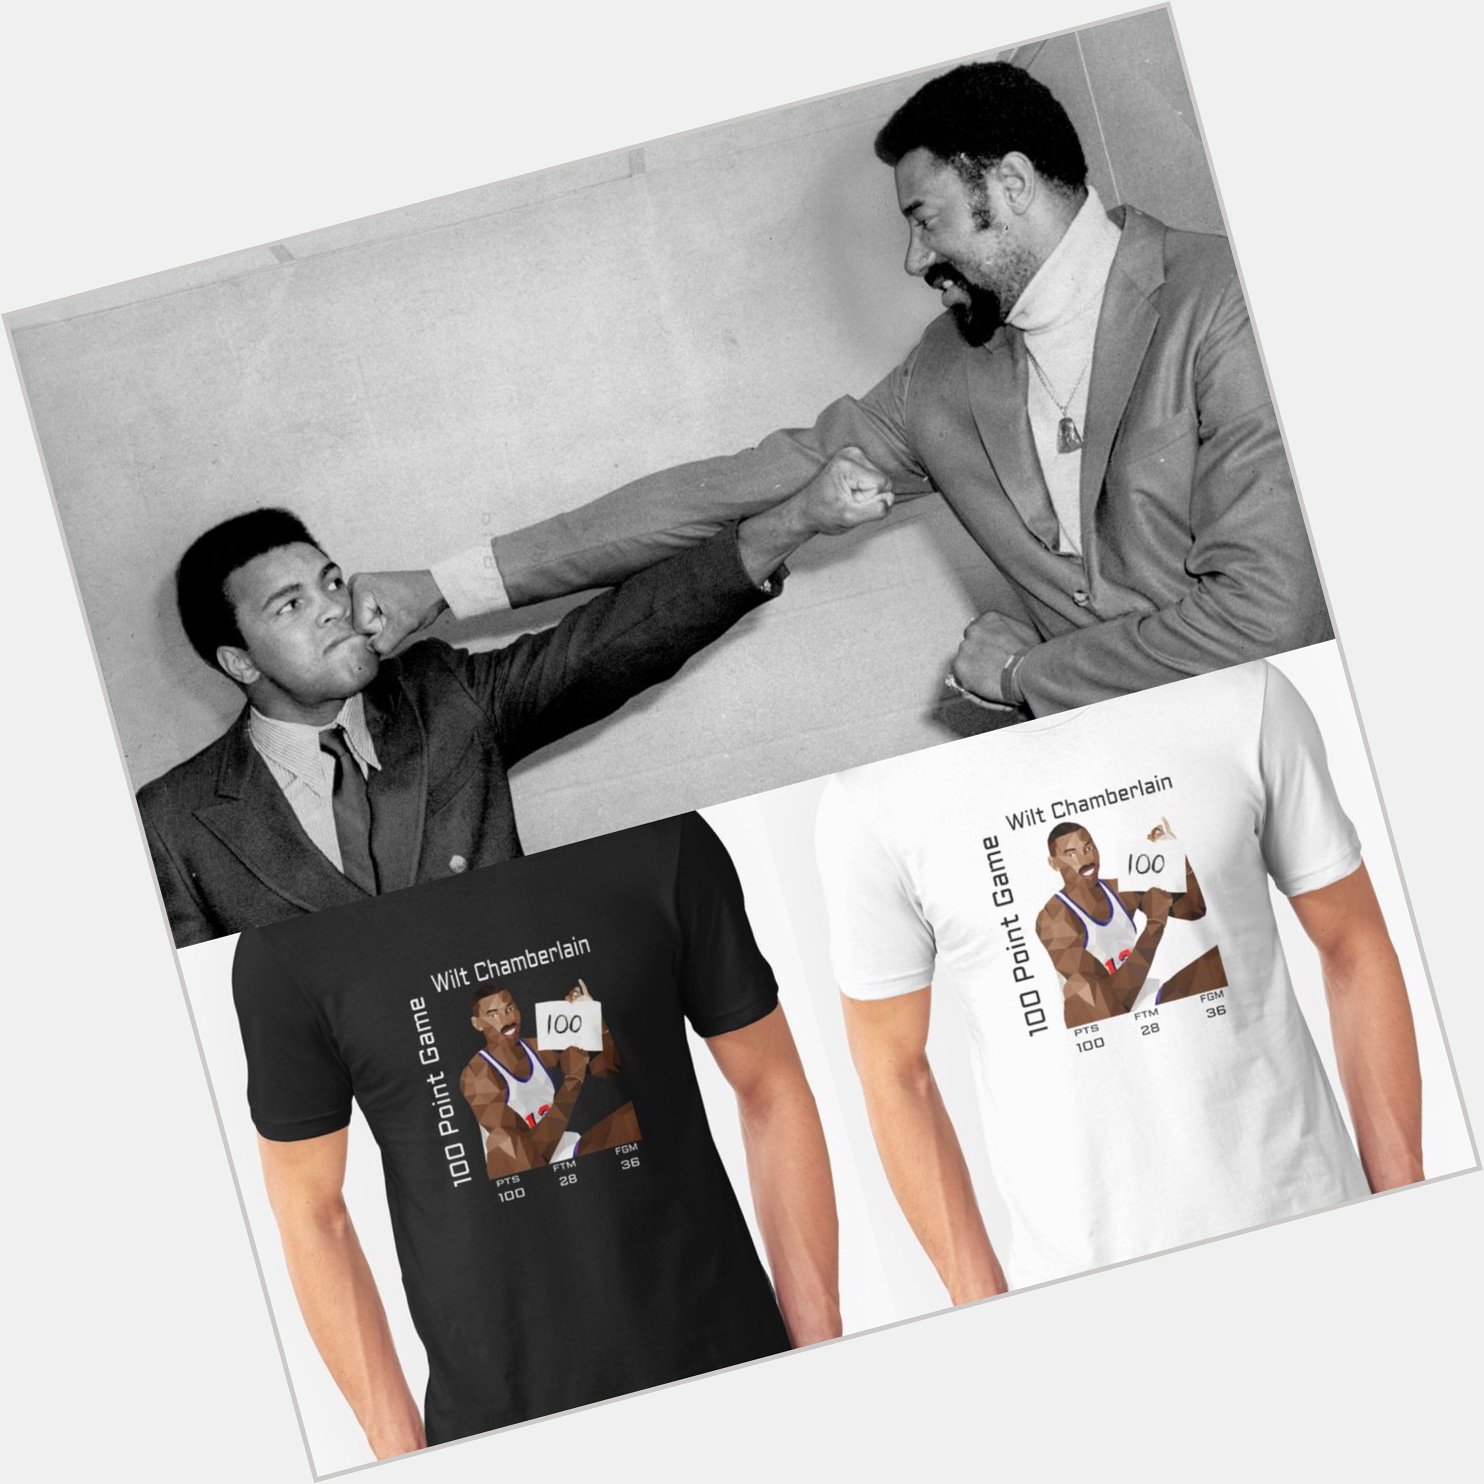 Happy Birthday to the late great Wilt Chamberlain!! 
Link below  